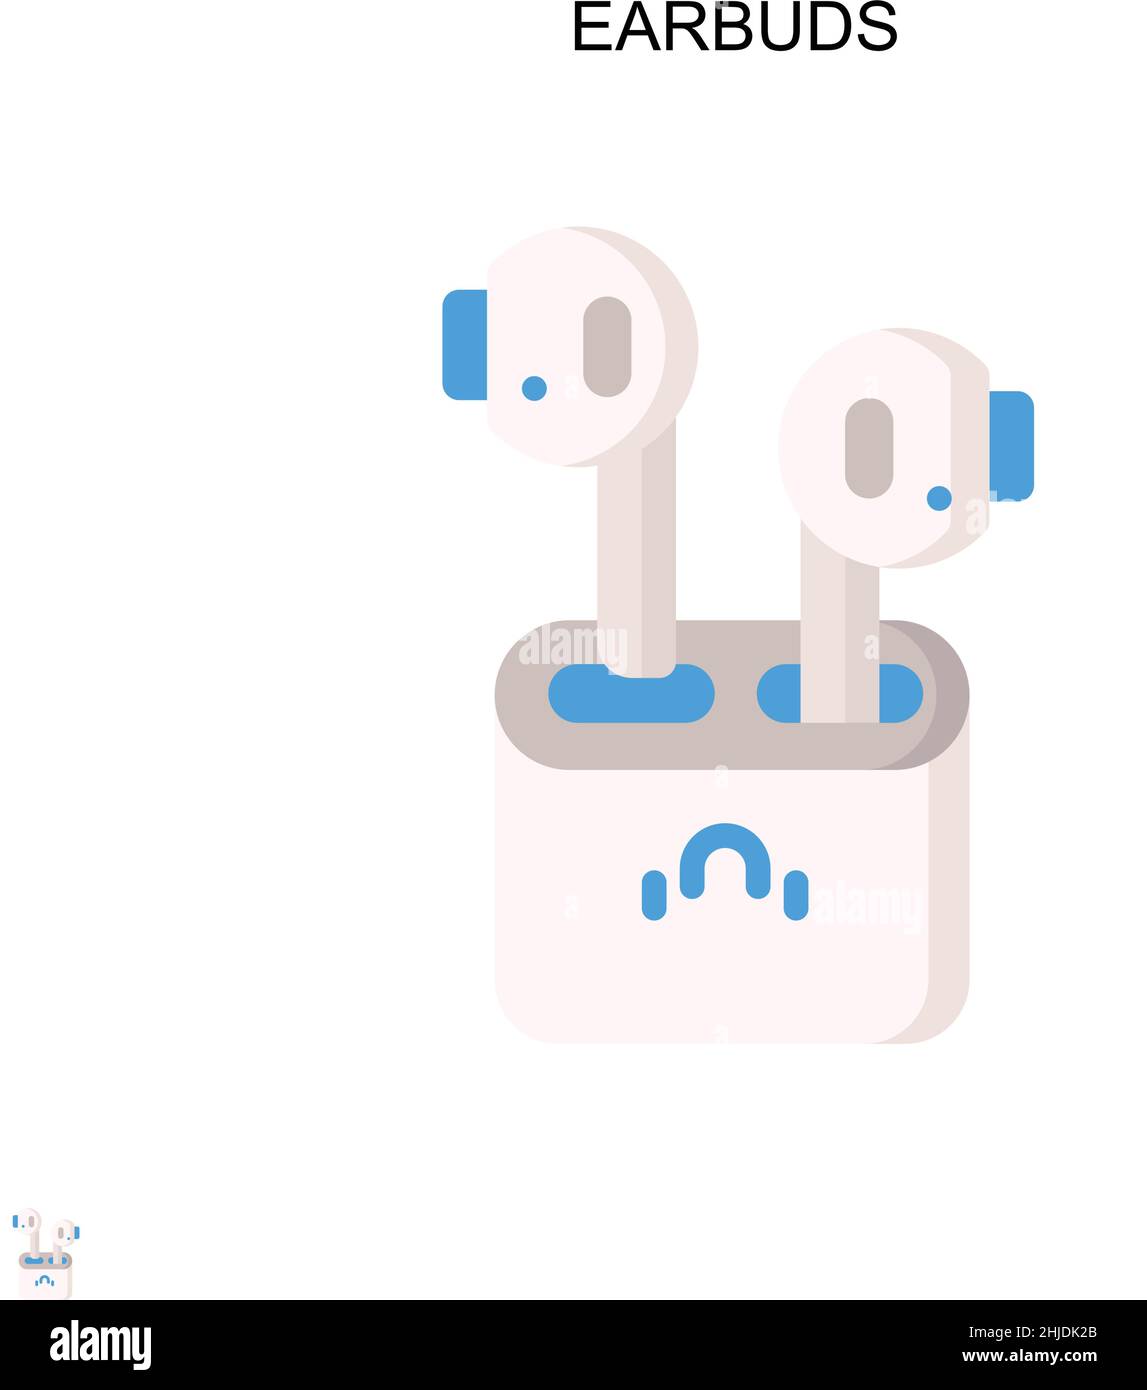 Earbuds Simple vector icon. Illustration symbol design template for web mobile UI element. Stock Vector